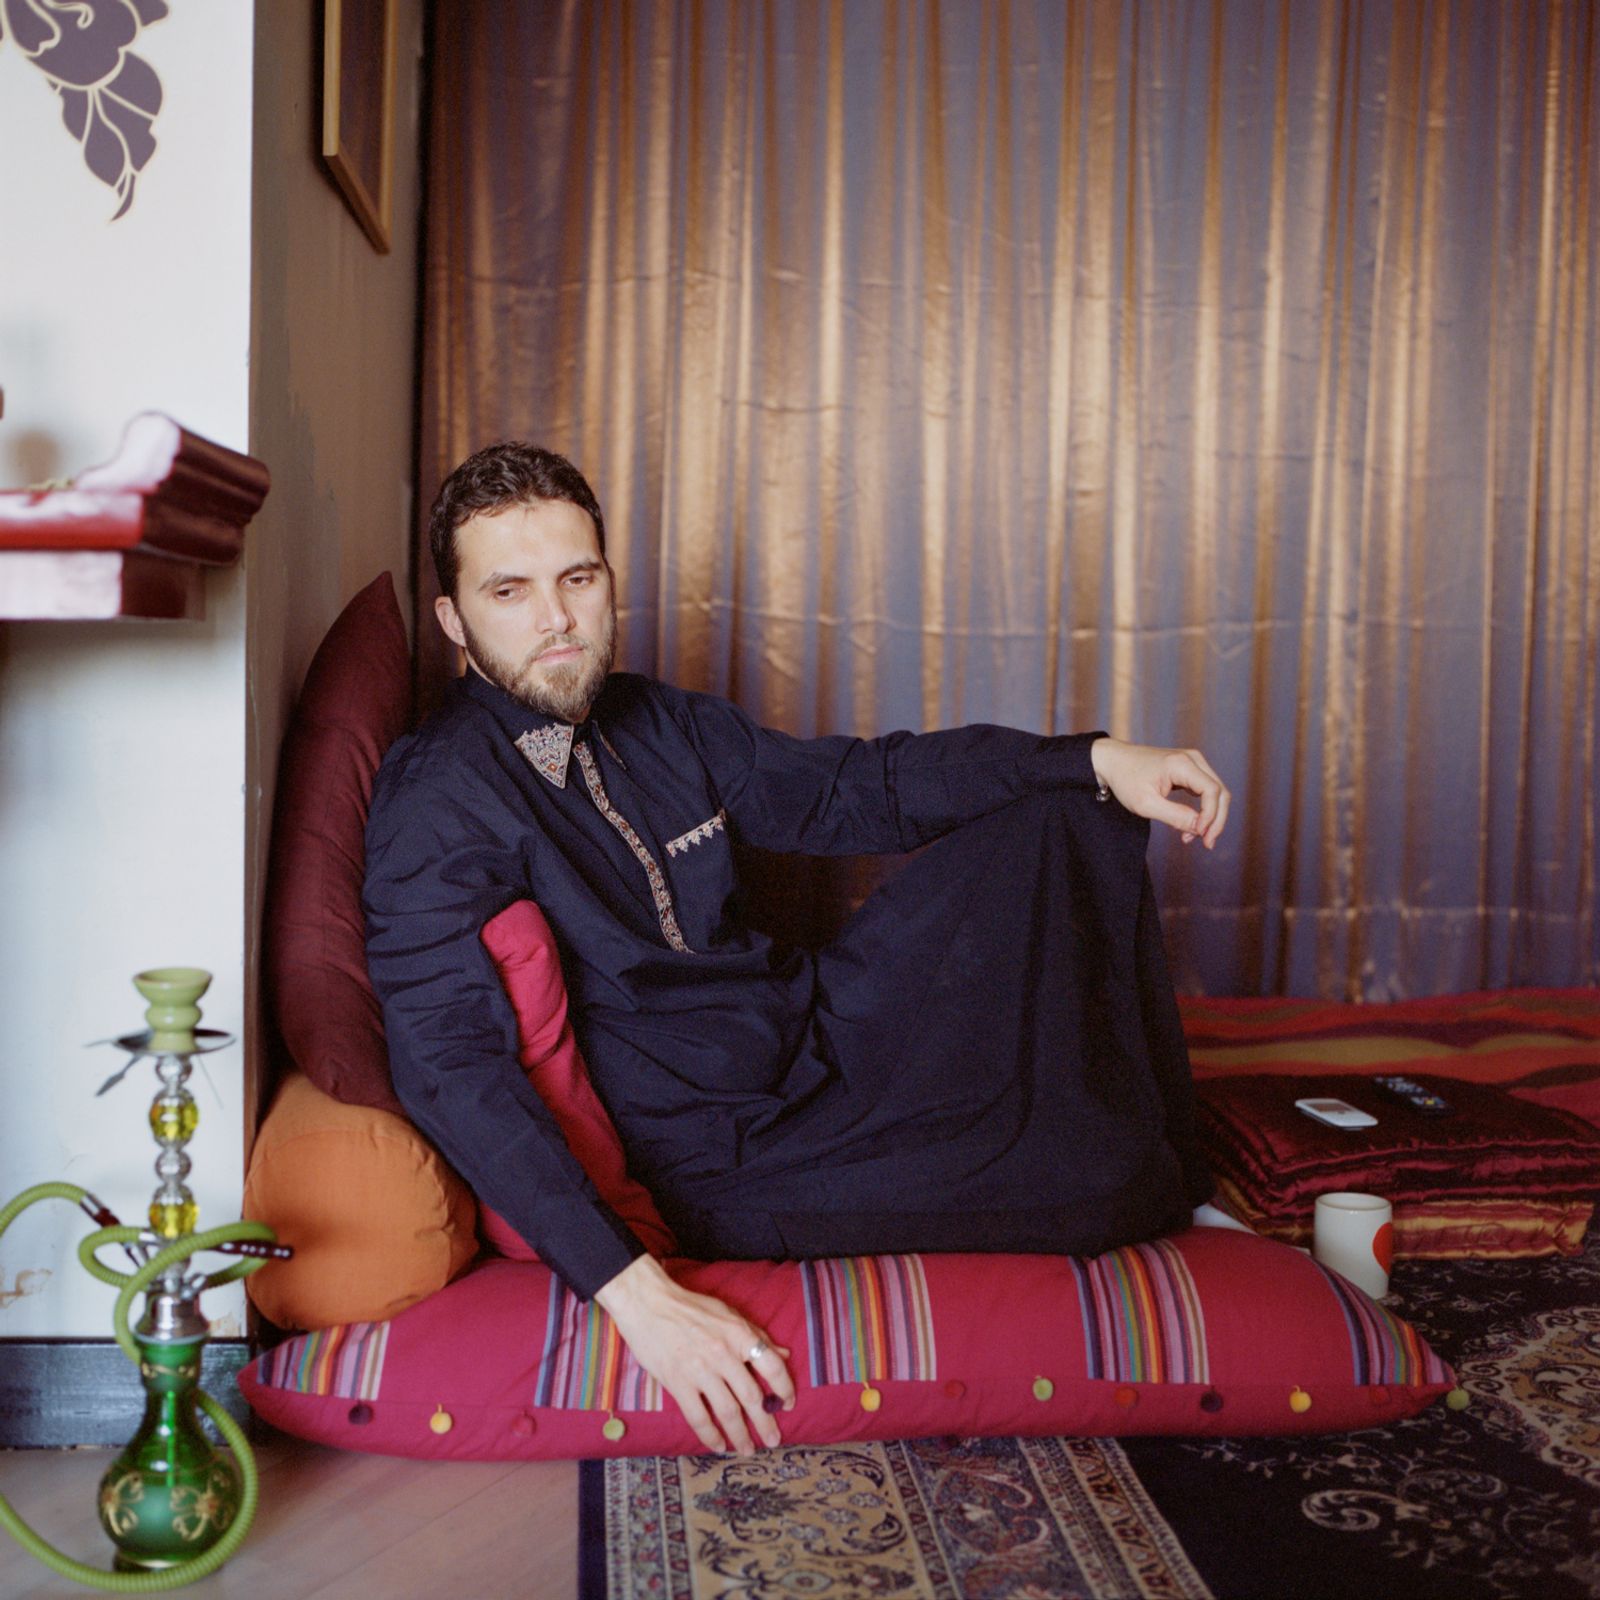 © Lia  Darjes - Image from the Being Queer. Feeling Muslim. photography project